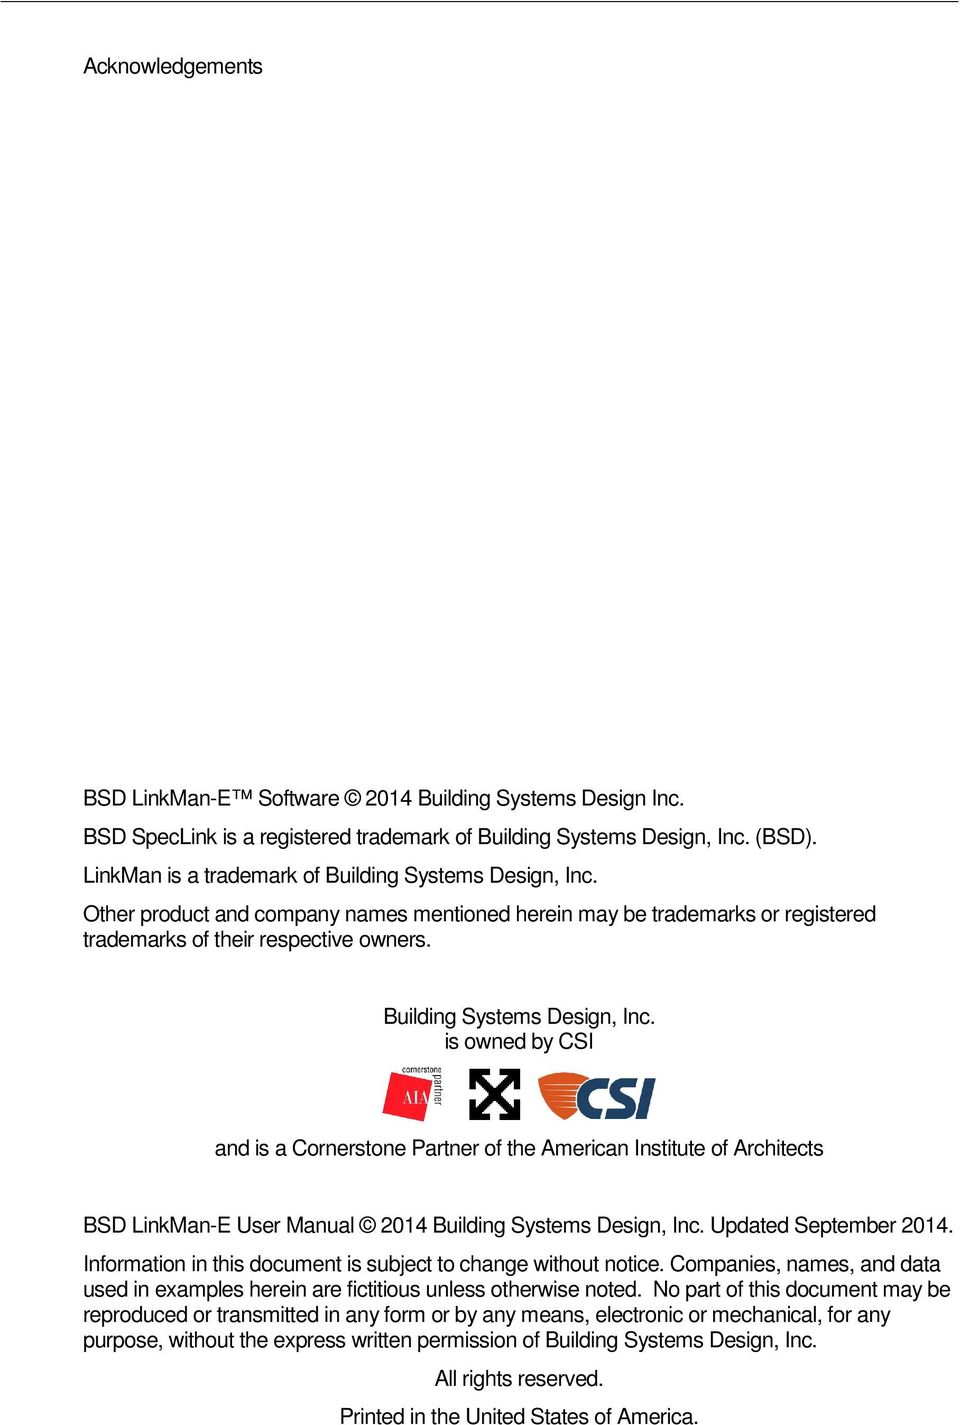 Building Systems Design, Inc. is owned by CSI and is a Cornerstone Partner of the American Institute of Architects BSD LinkMan-E User Manual 2014 Building Systems Design, Inc. Updated September 2014.